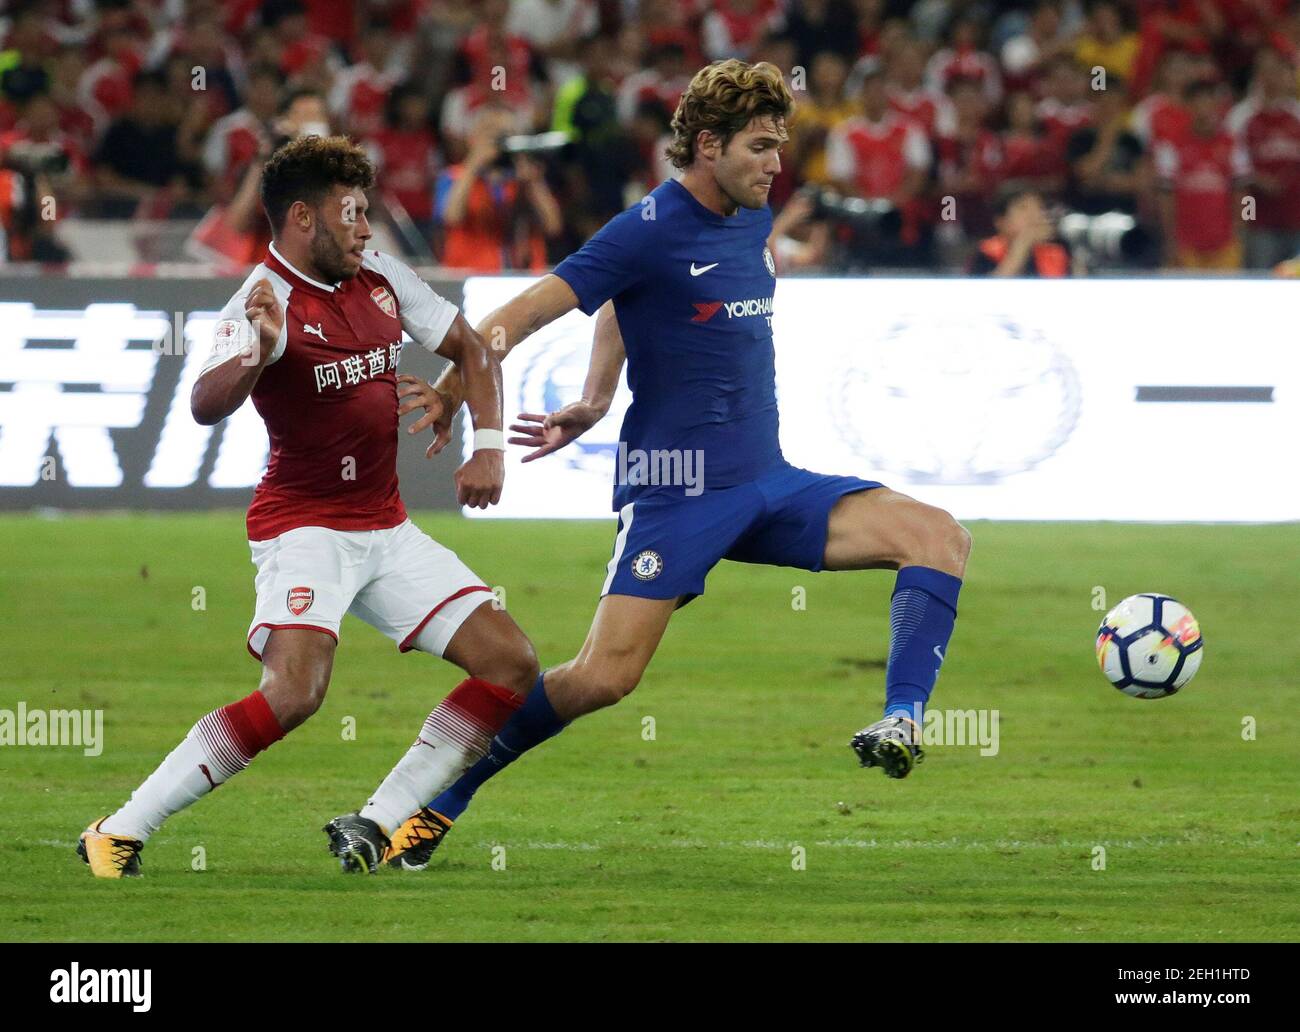 Soccer Football - Arsenal v Chelsea - Pre Season Friendly - June 22, 2017  Chelsea's Marcos Alonso in action with Arsenal's Alex Oxlade-Chamberlain   REUTERS/JASON LEE Stock Photo